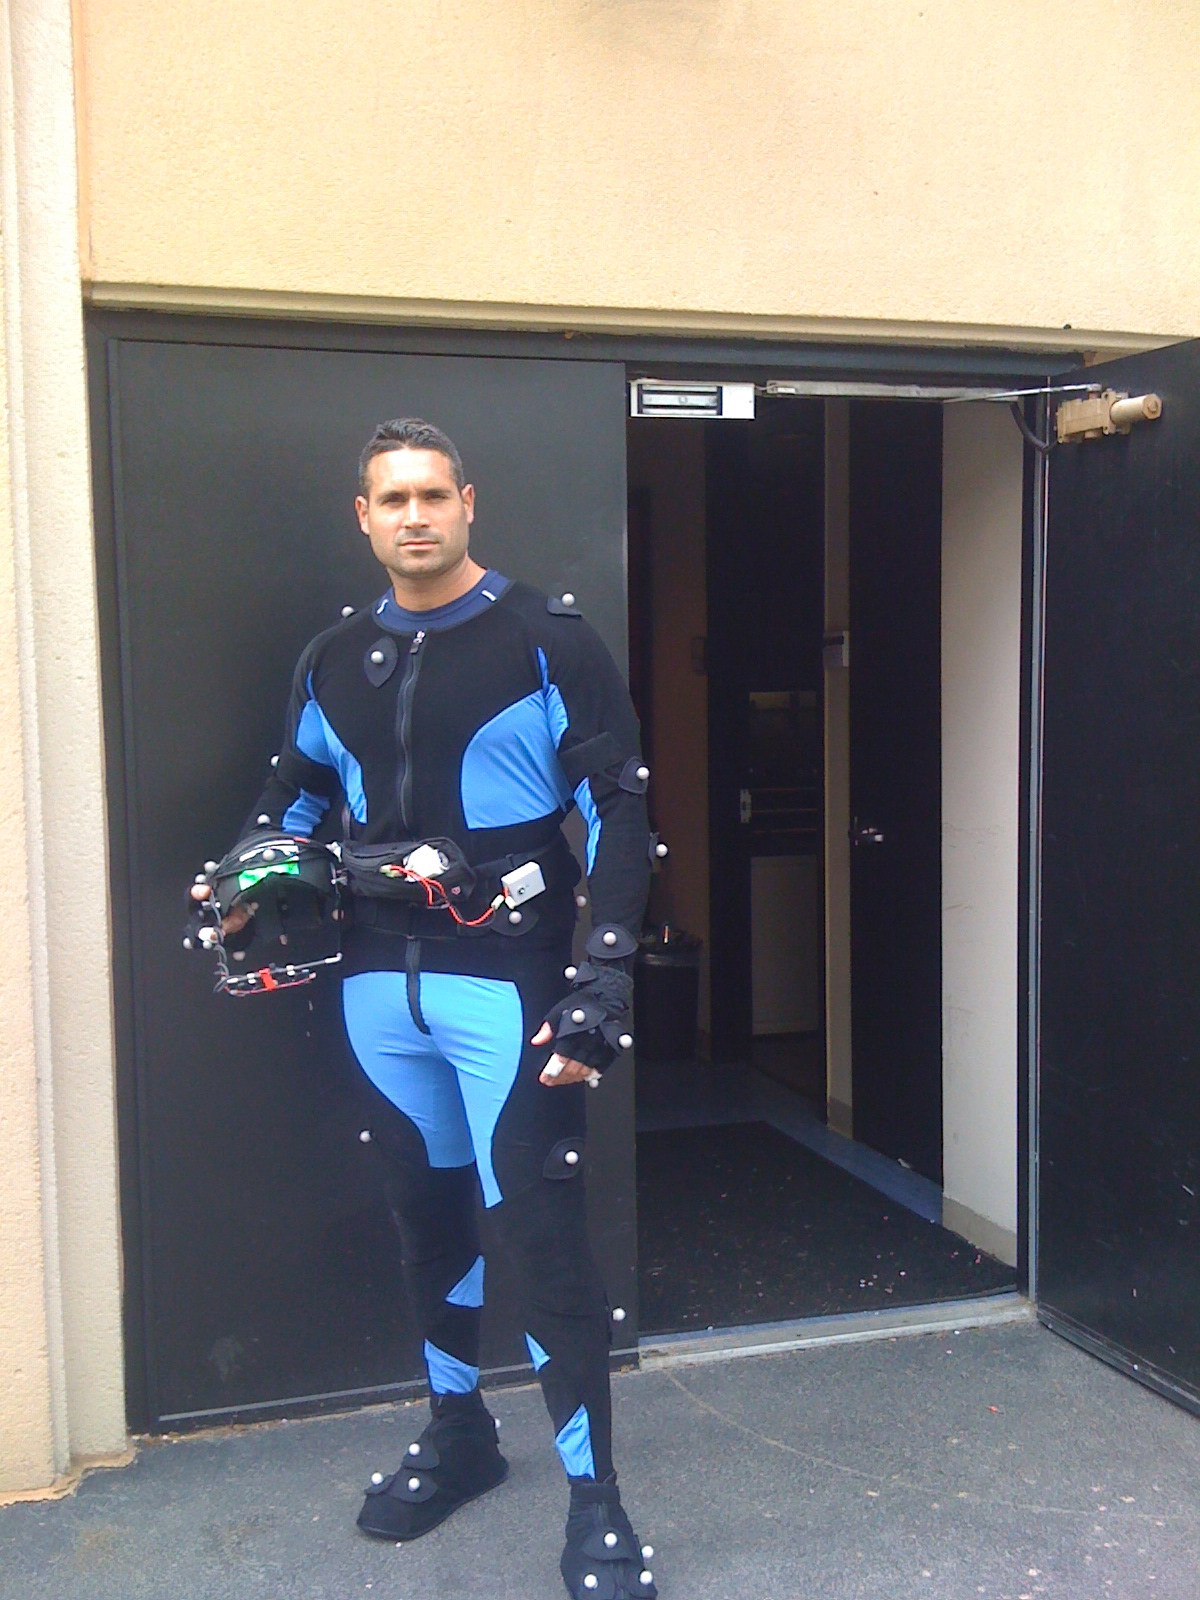 Still of Frank Fortunato in Motion Capture suit for Max Payne 3